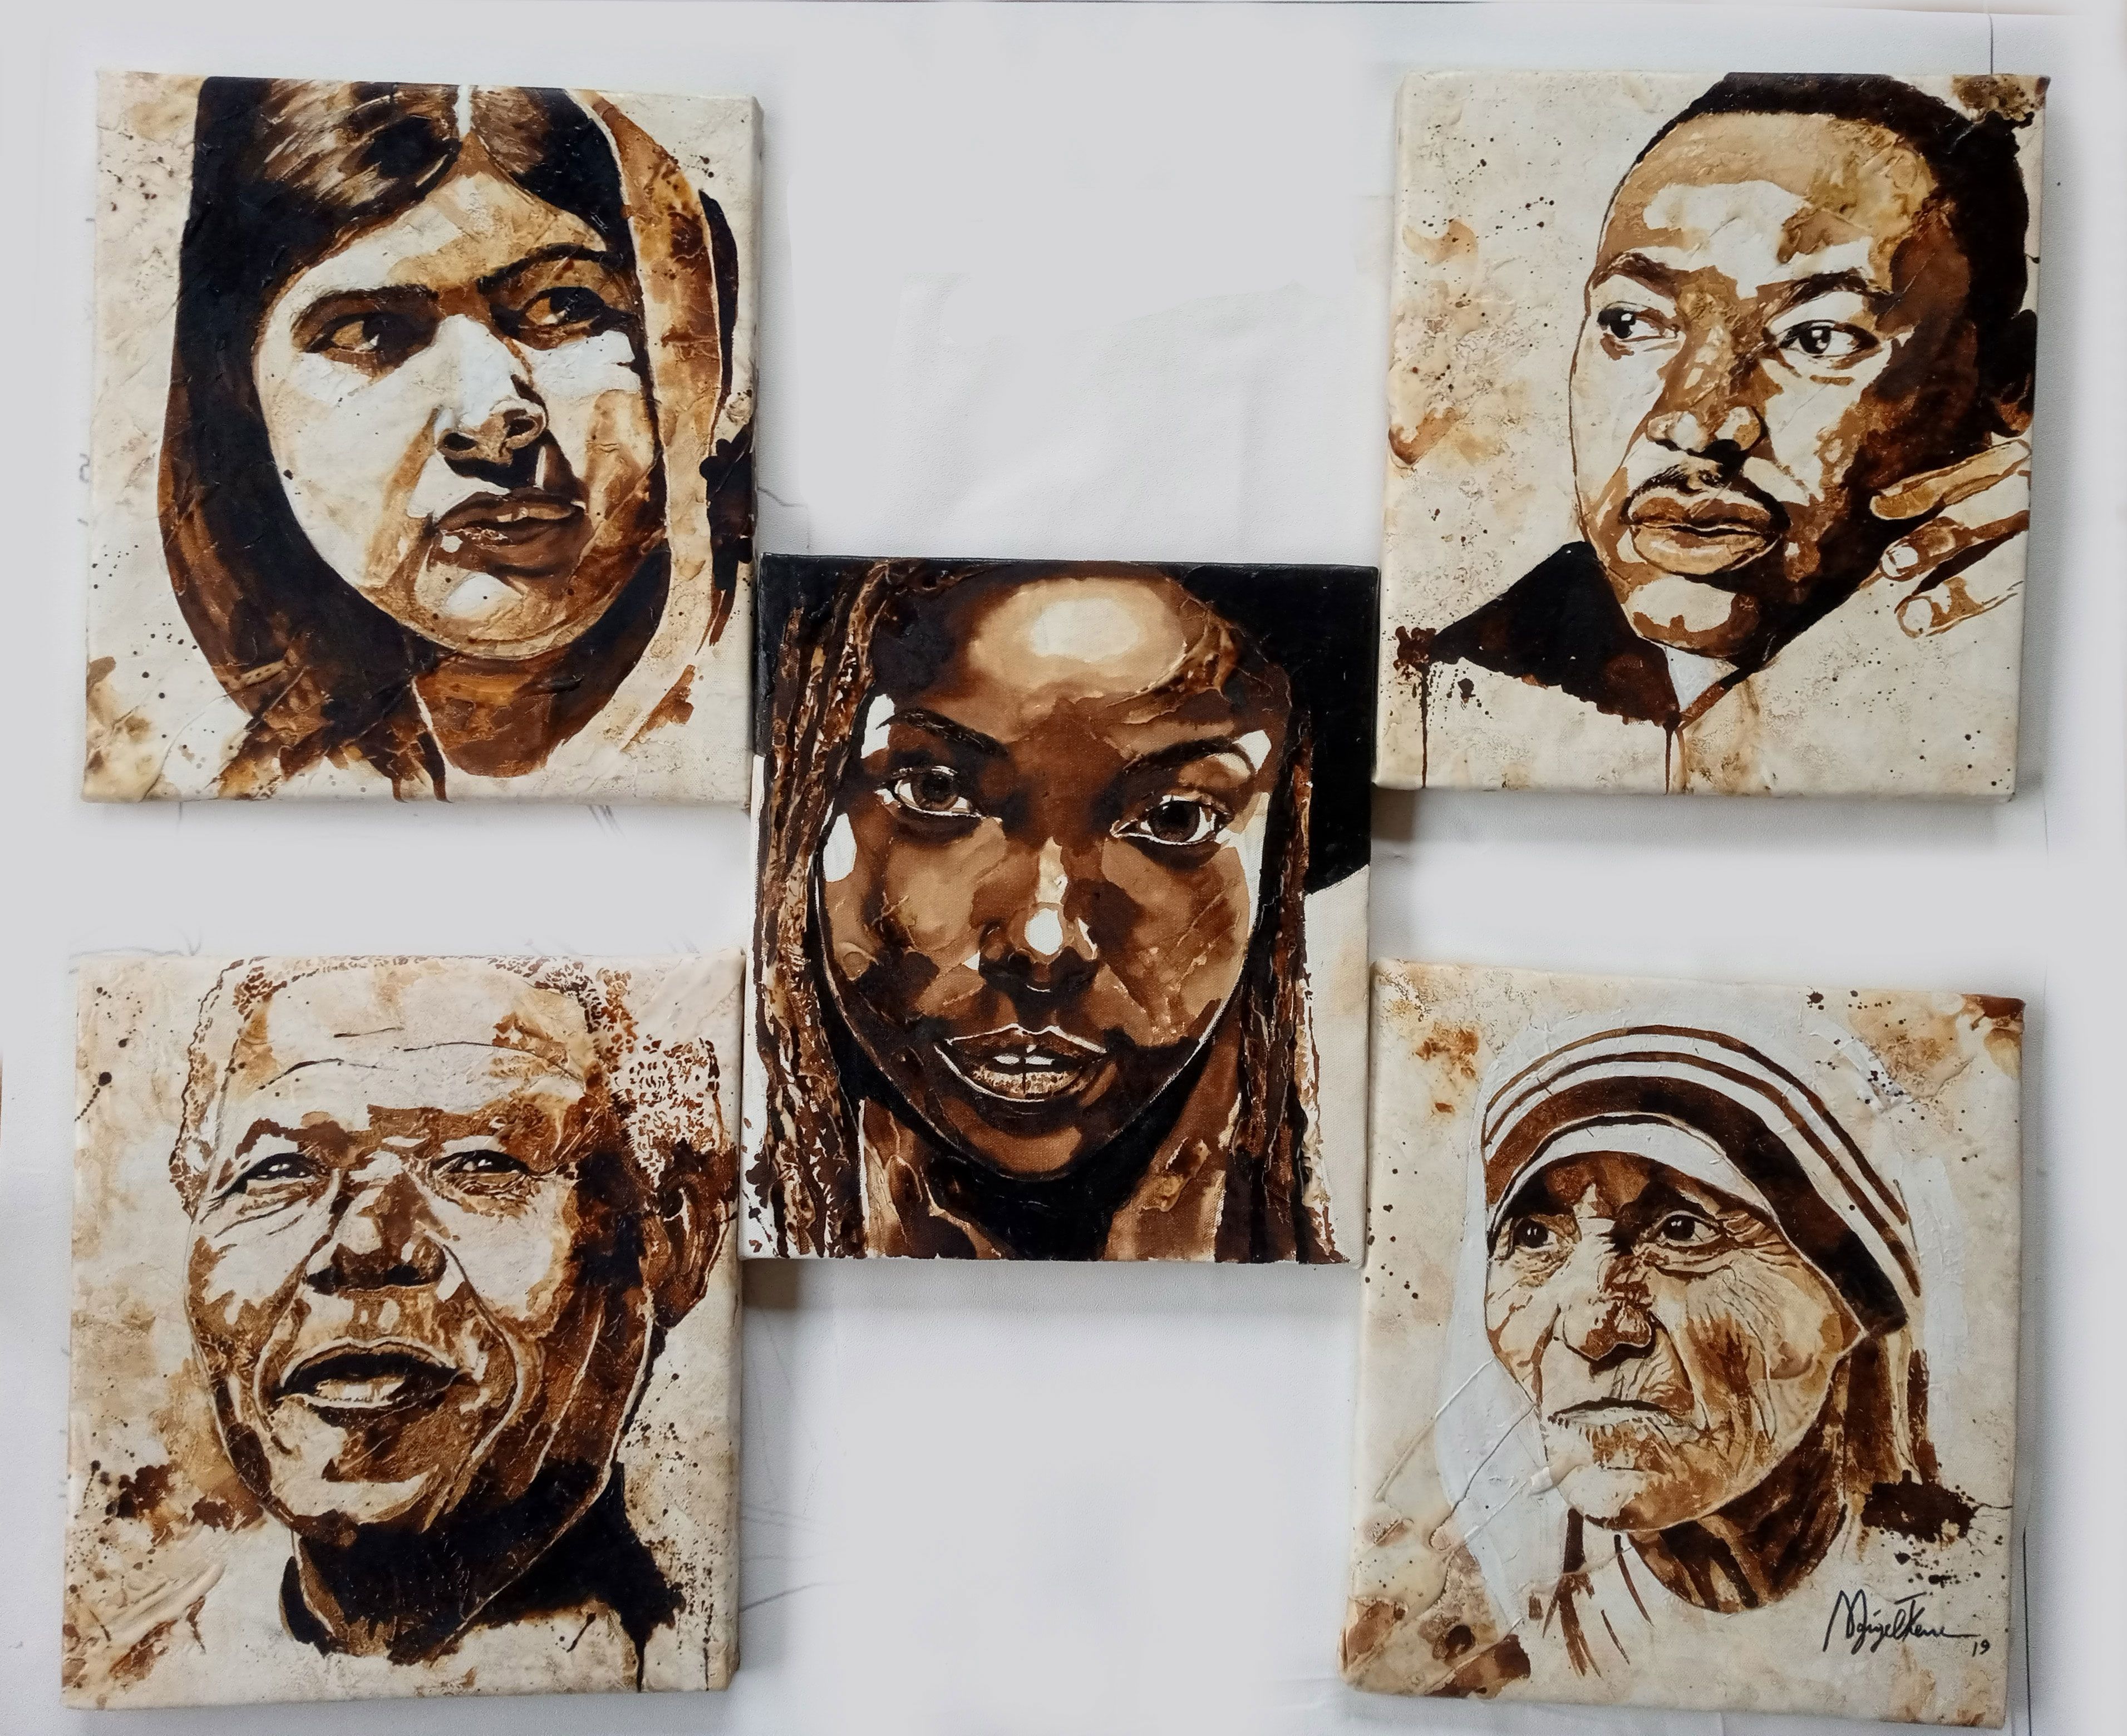 SA artist who went viral painting with coffee, gets first